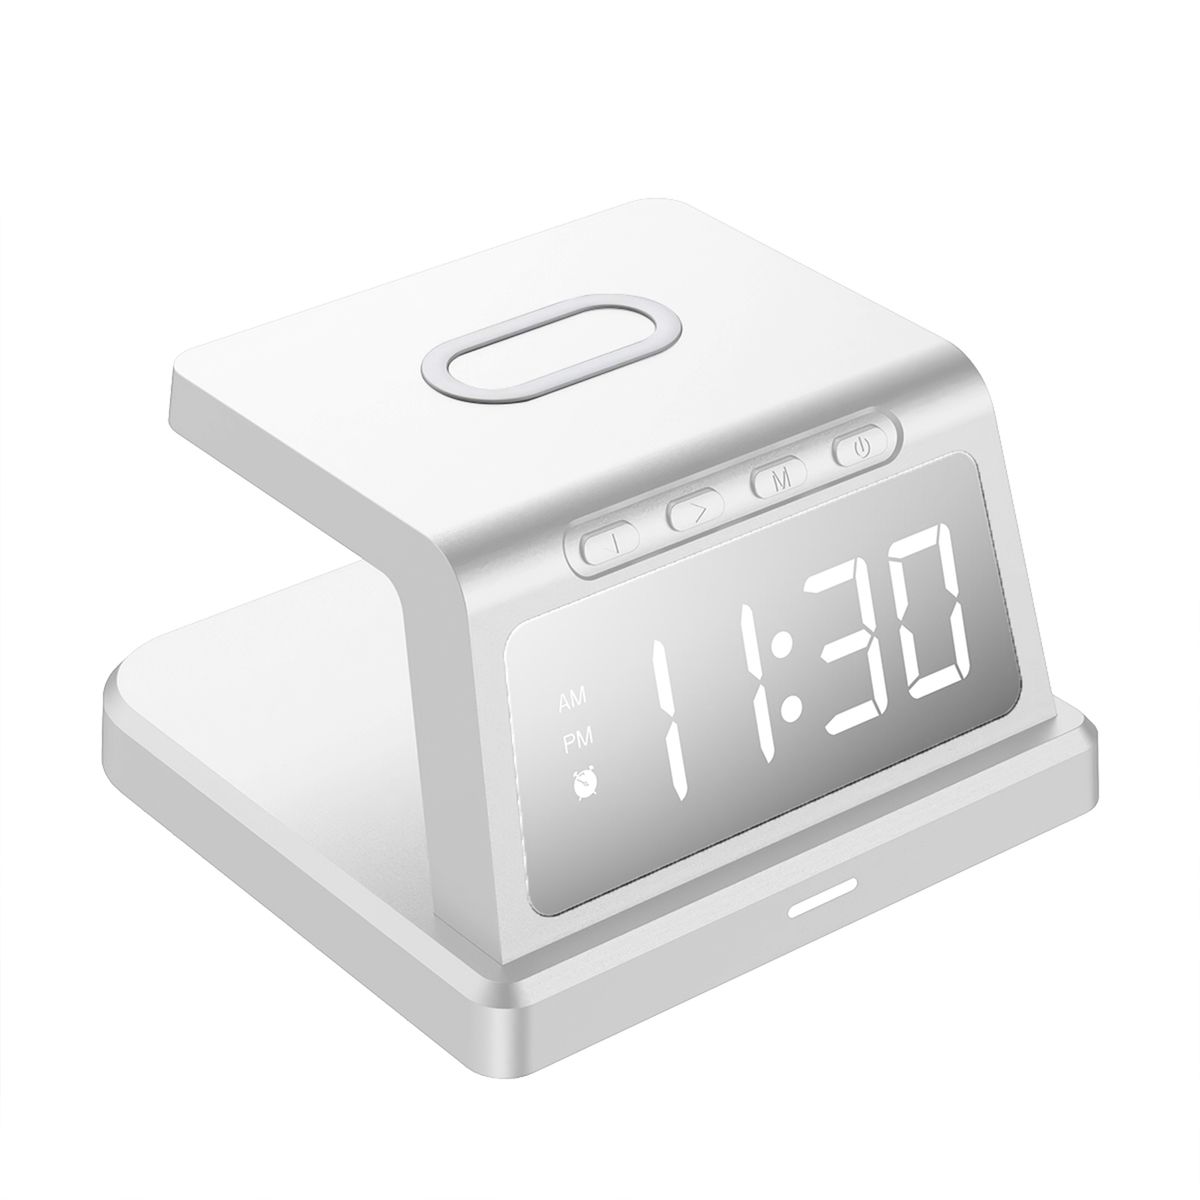 Photos - Radio / Table Clock Private Label Digital Clock Wireless Charger - White ZTWC046WT